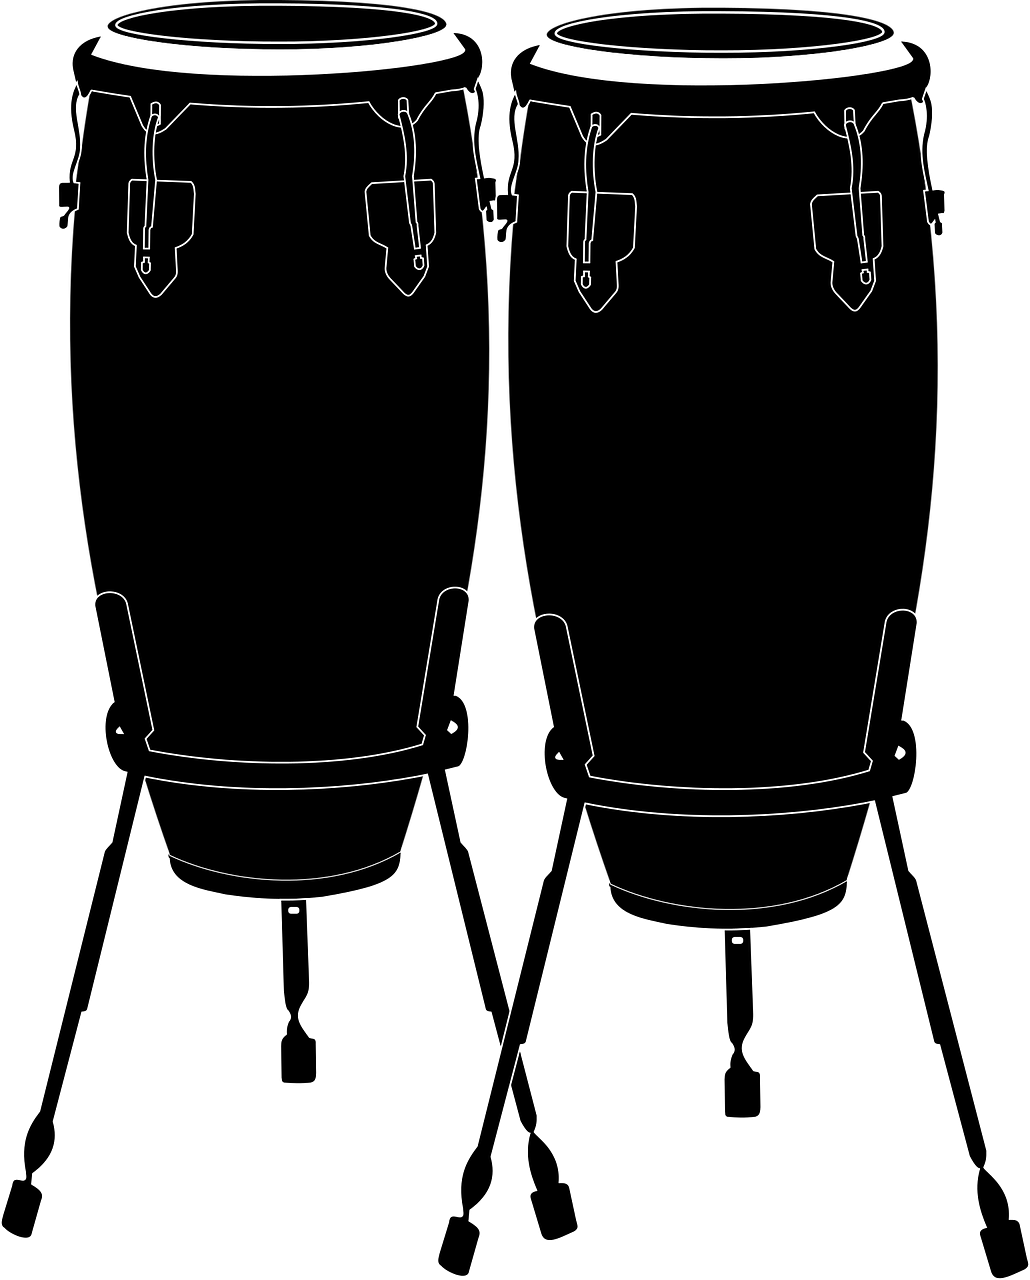 a couple of chairs sitting next to each other, concept art, by Andrei Kolkoutine, conceptual art, black backround. inkscape, bottom - view, crutches, head straight down